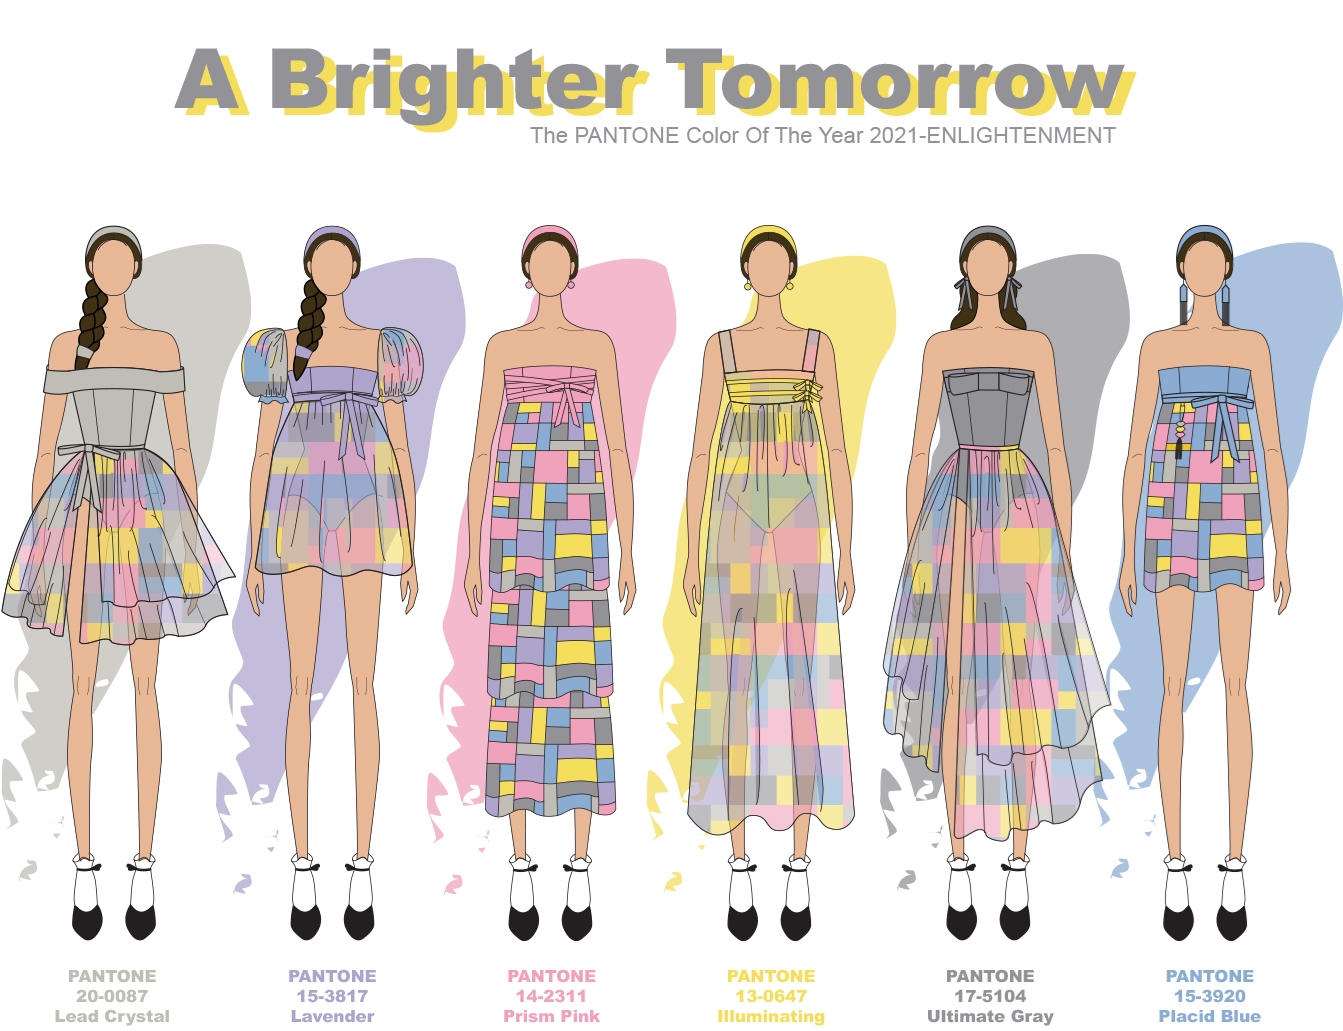 "The Colors of The Year 2021" by third-year Fashion Arts student Sori Park